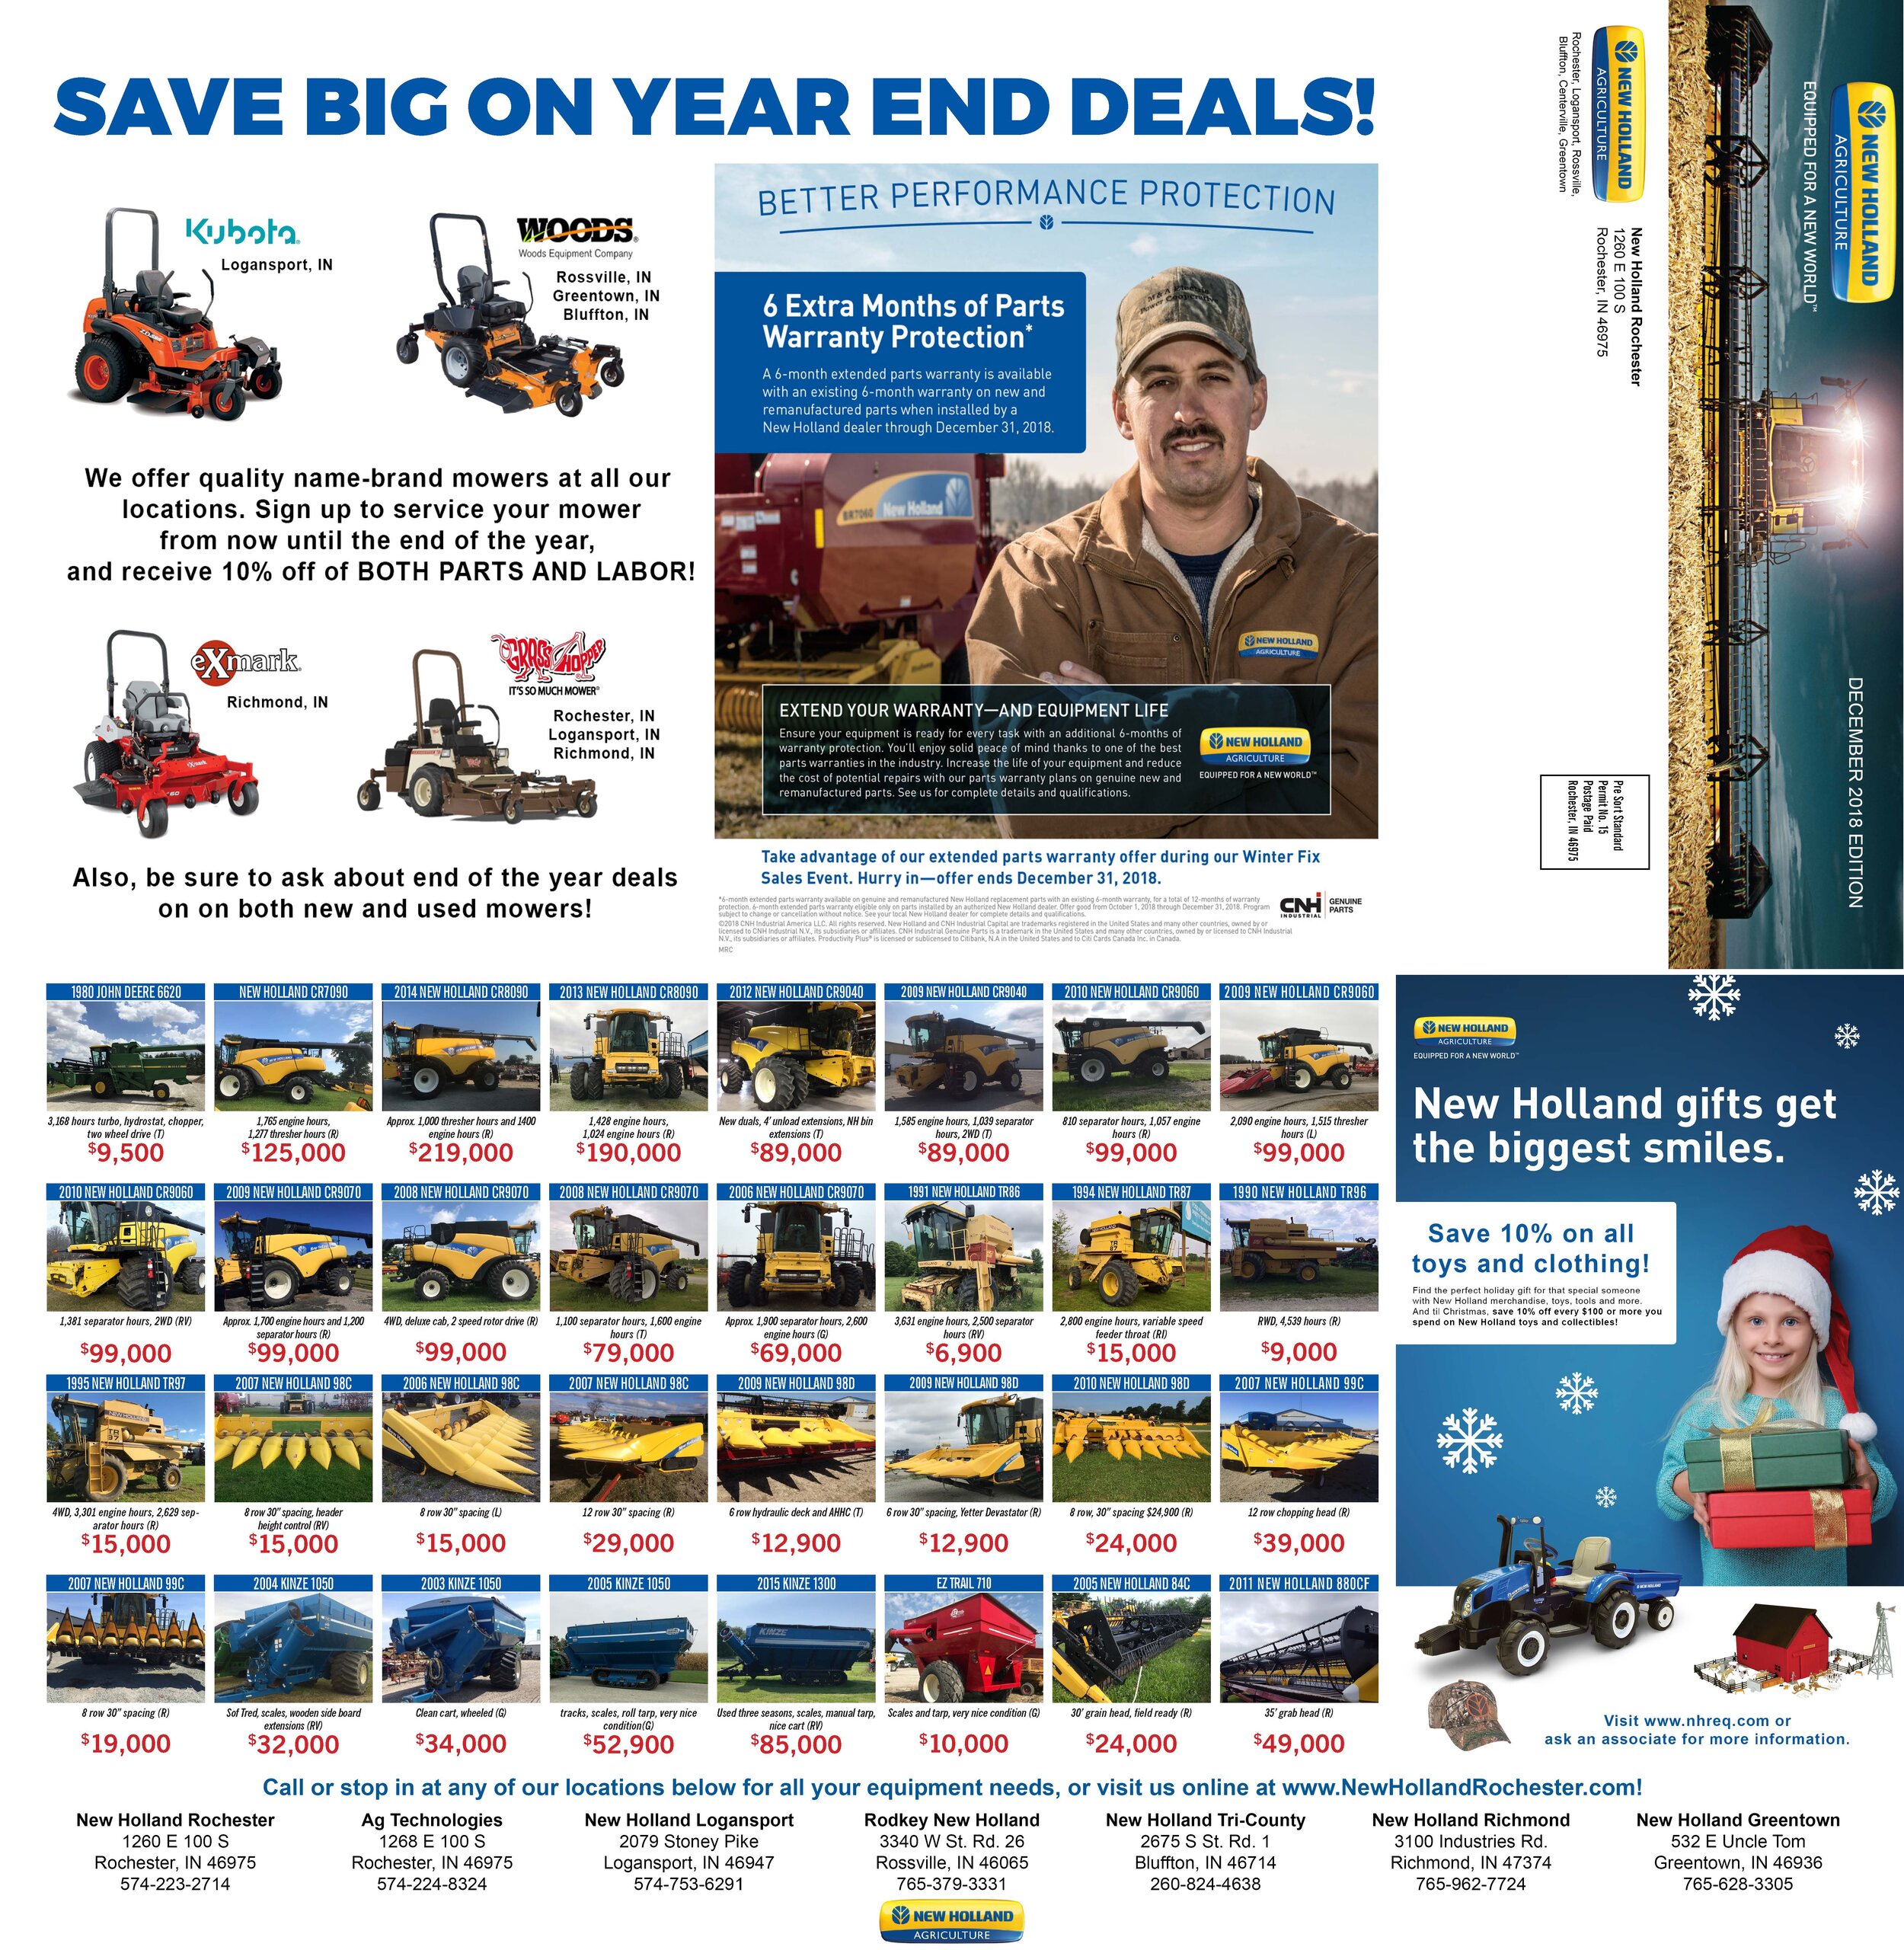 New Holland Direct Mail December_Page_1.jpg